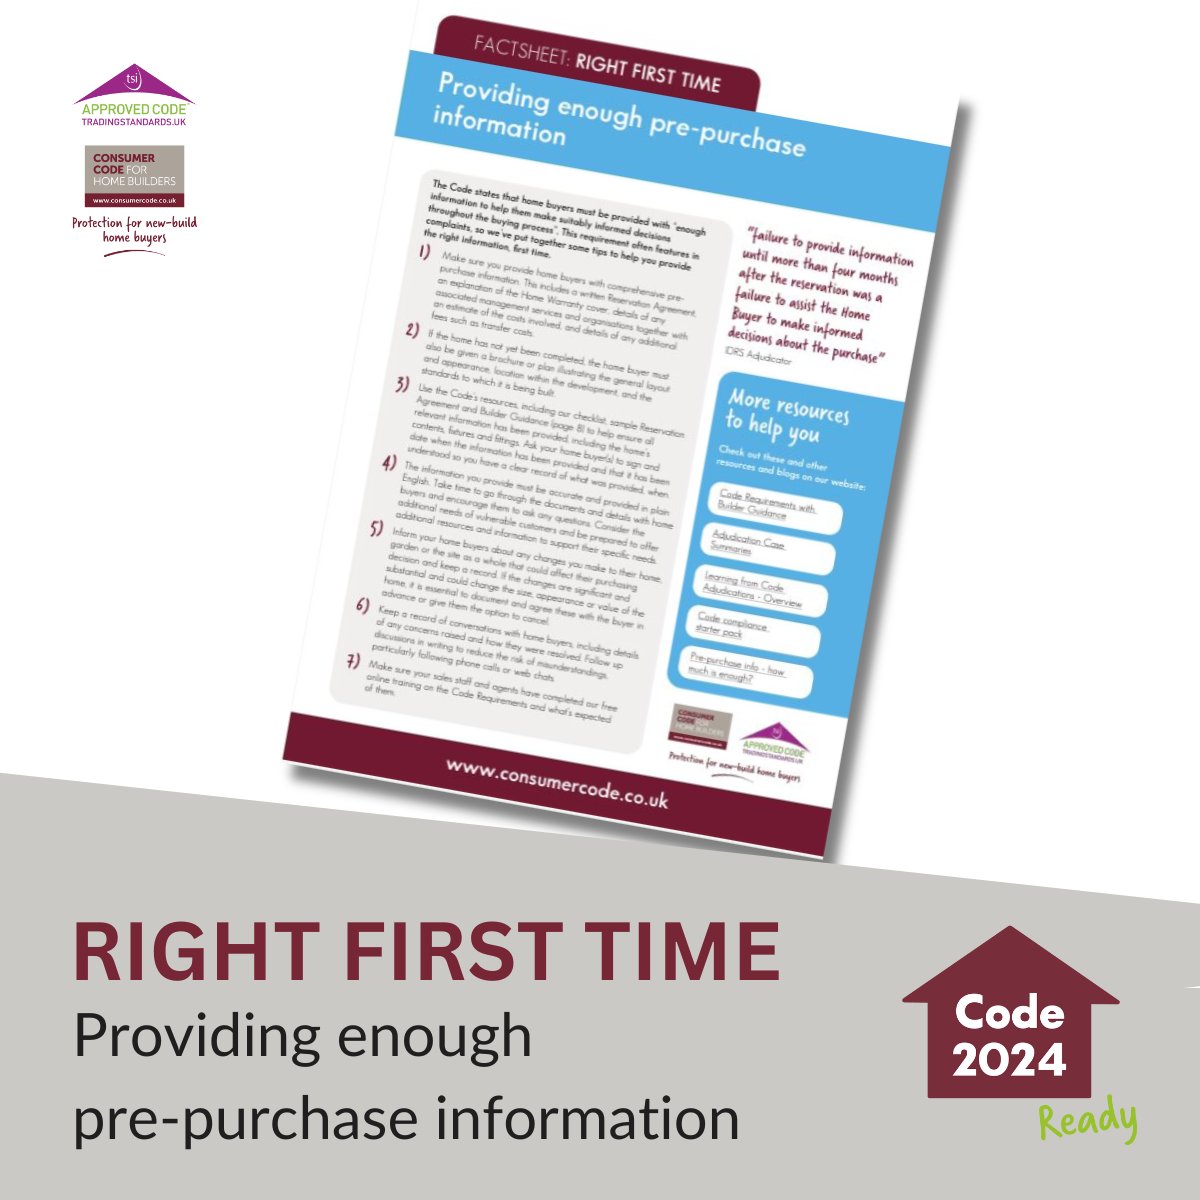 New Home builders – make sure you're giving your buyers enough pre-purchase info which for homes that are not yet completed includes general layout, appearance, location and standards – read more here consumercode.co.uk/wp-content/upl… @homebuildersfed @fmbuilders @nfbuilders